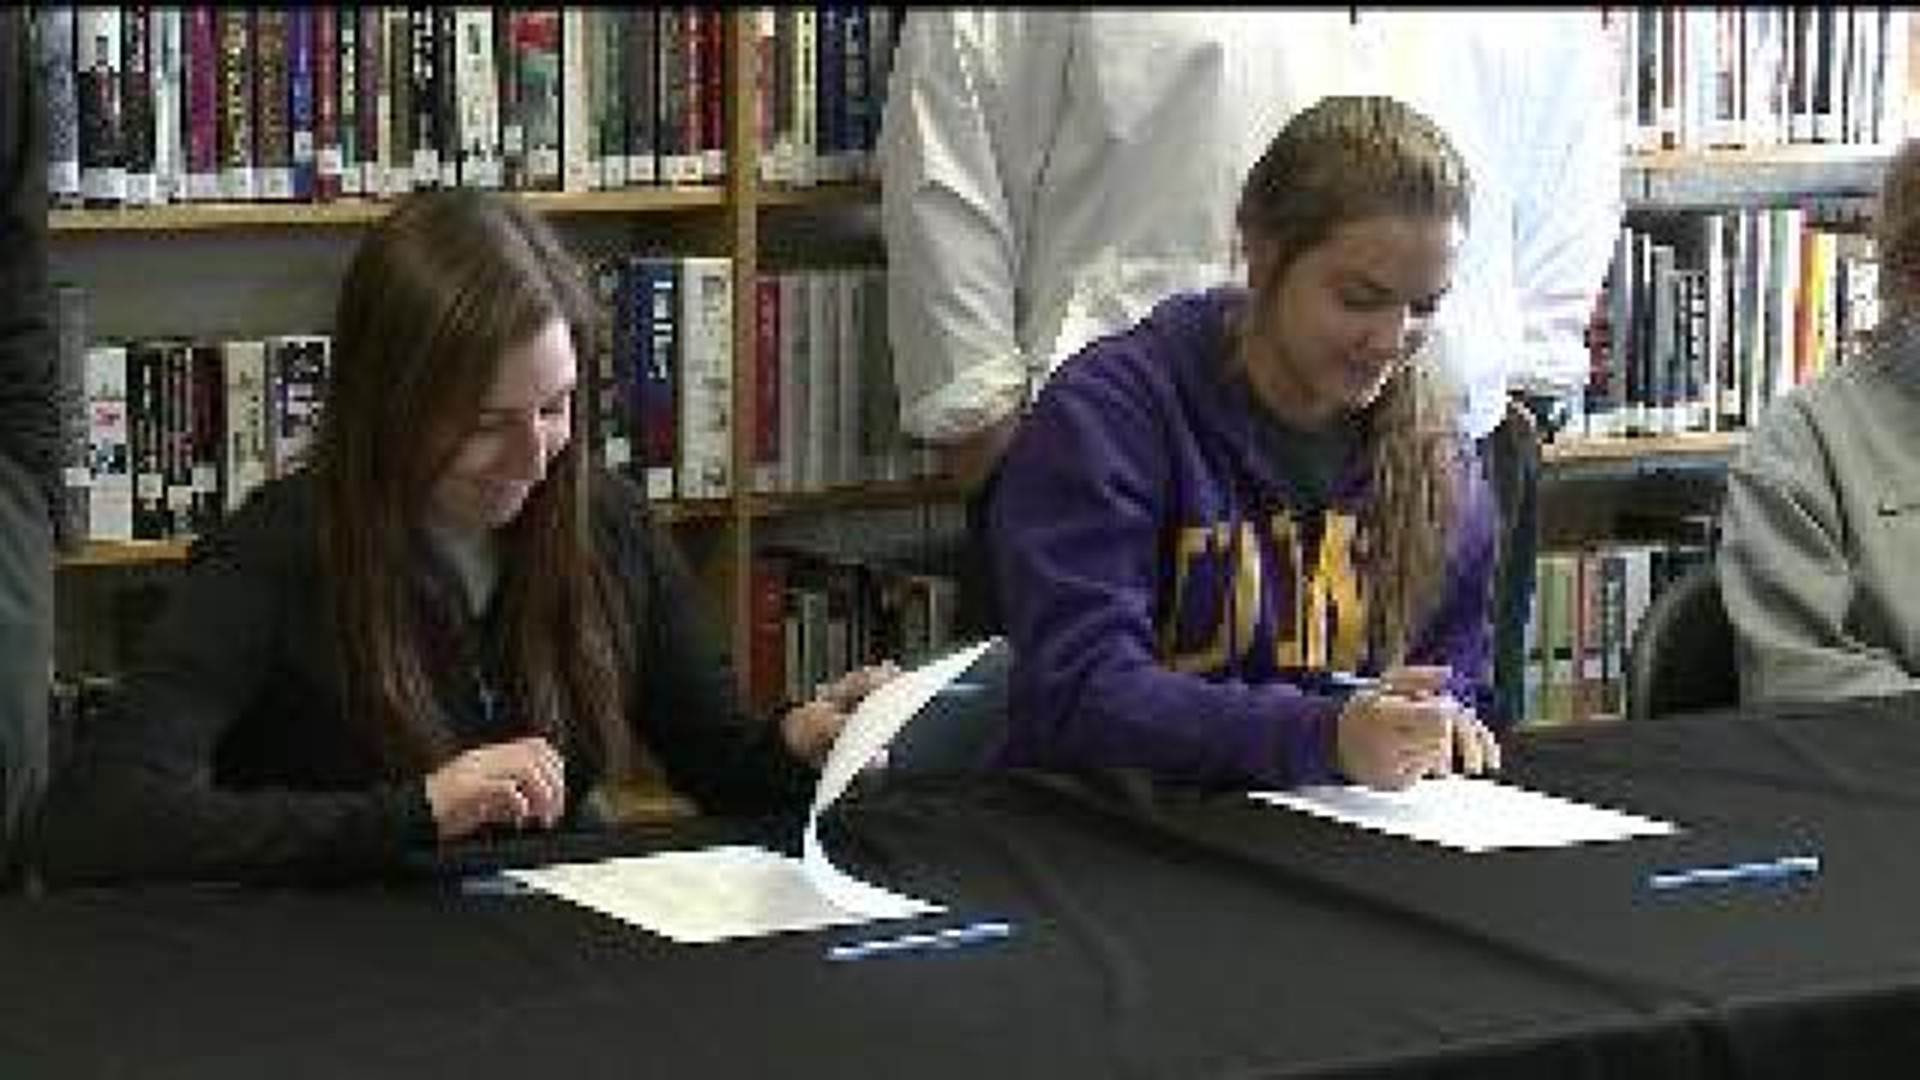 Assumption Duo Headed to Next Level